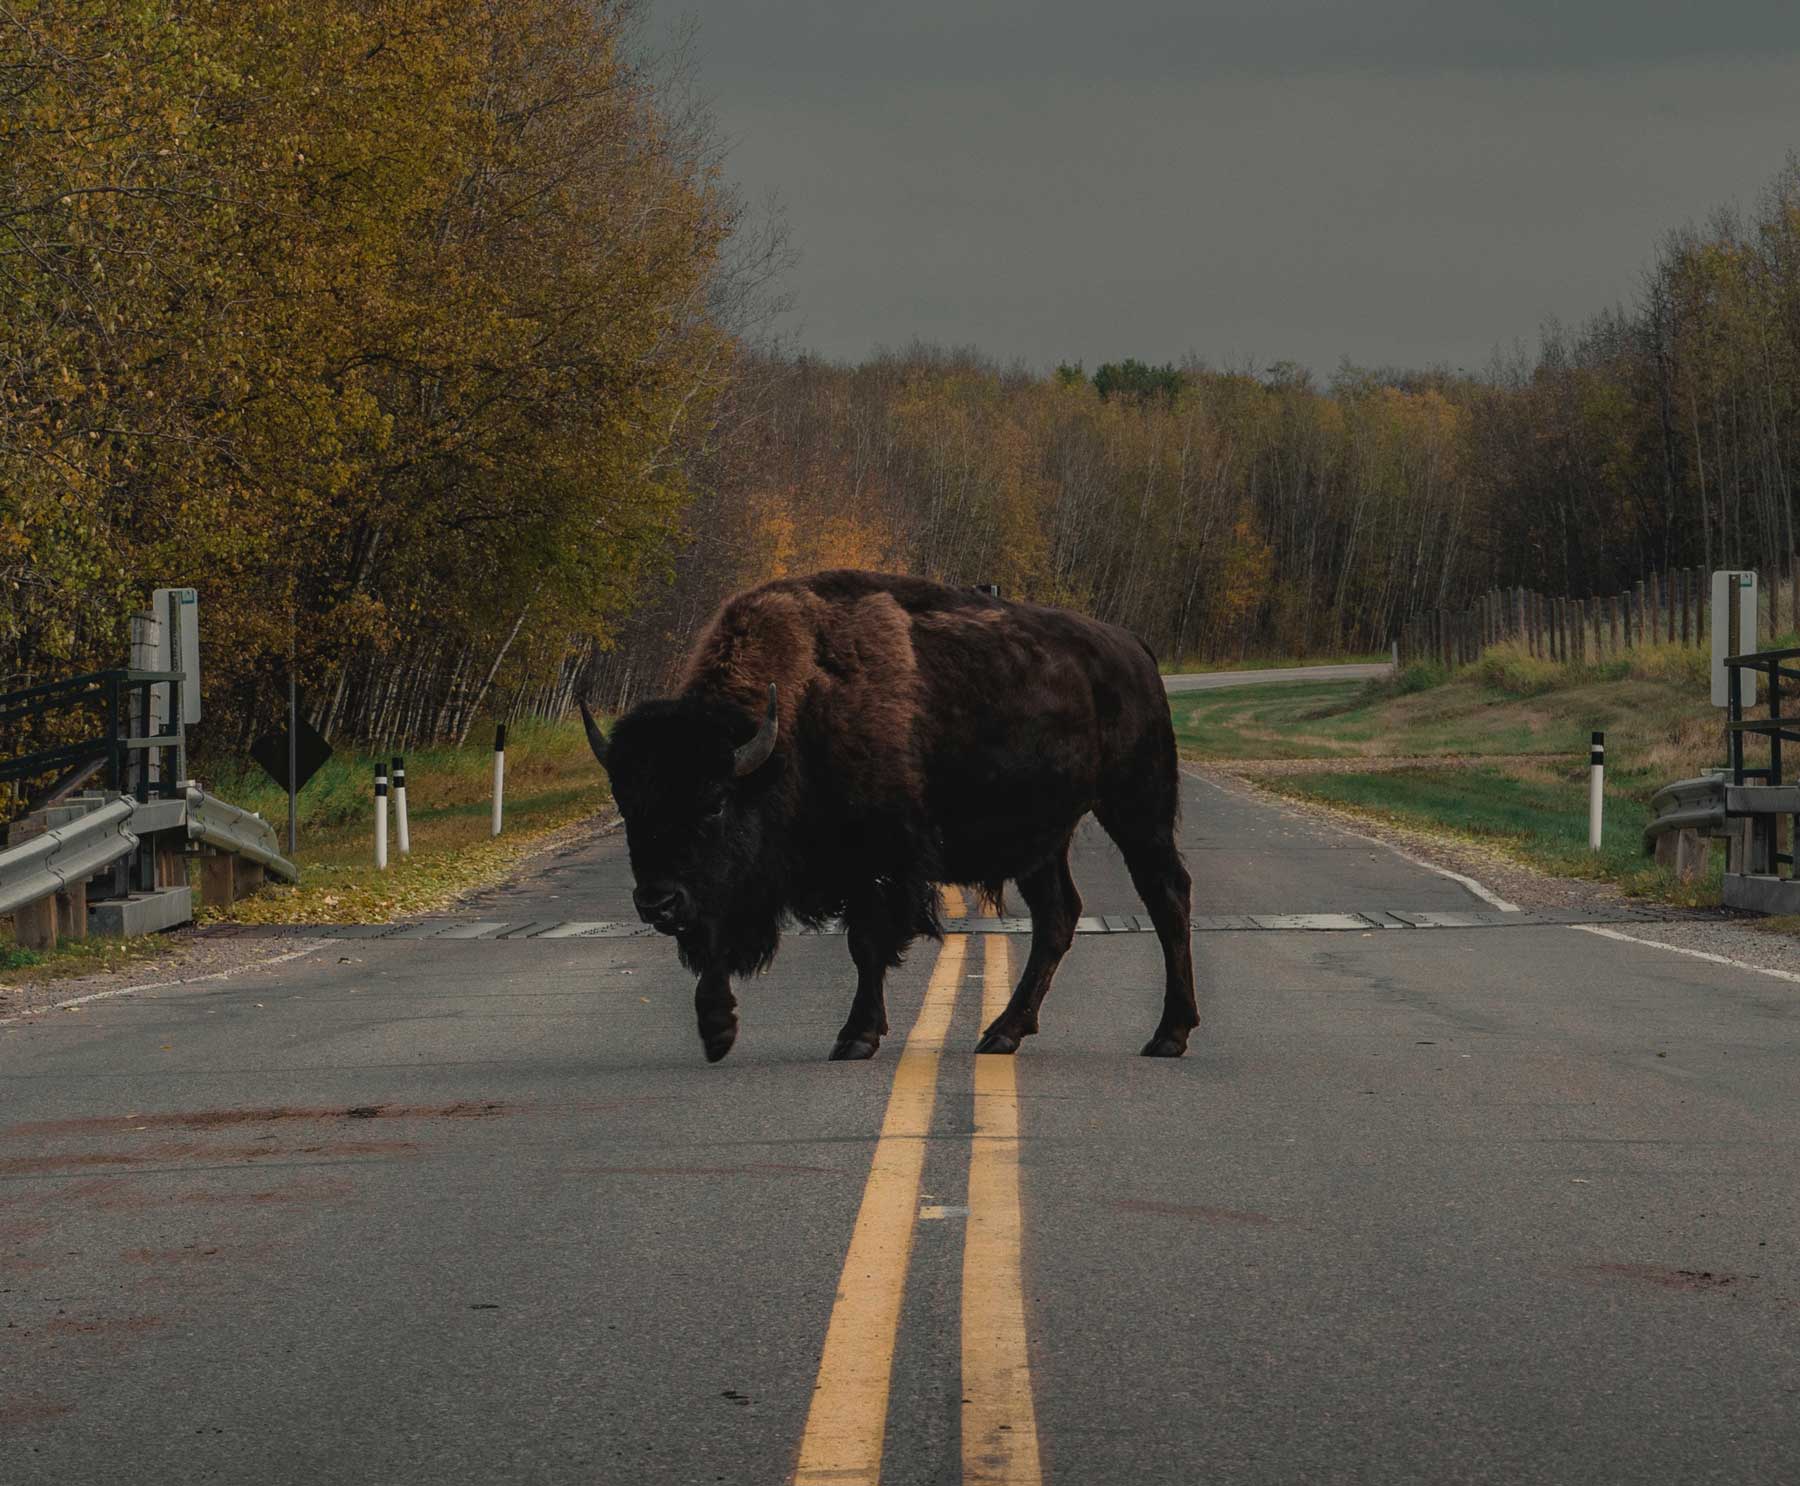 water buffalo standing on double yellow line going down road autumn trees line road